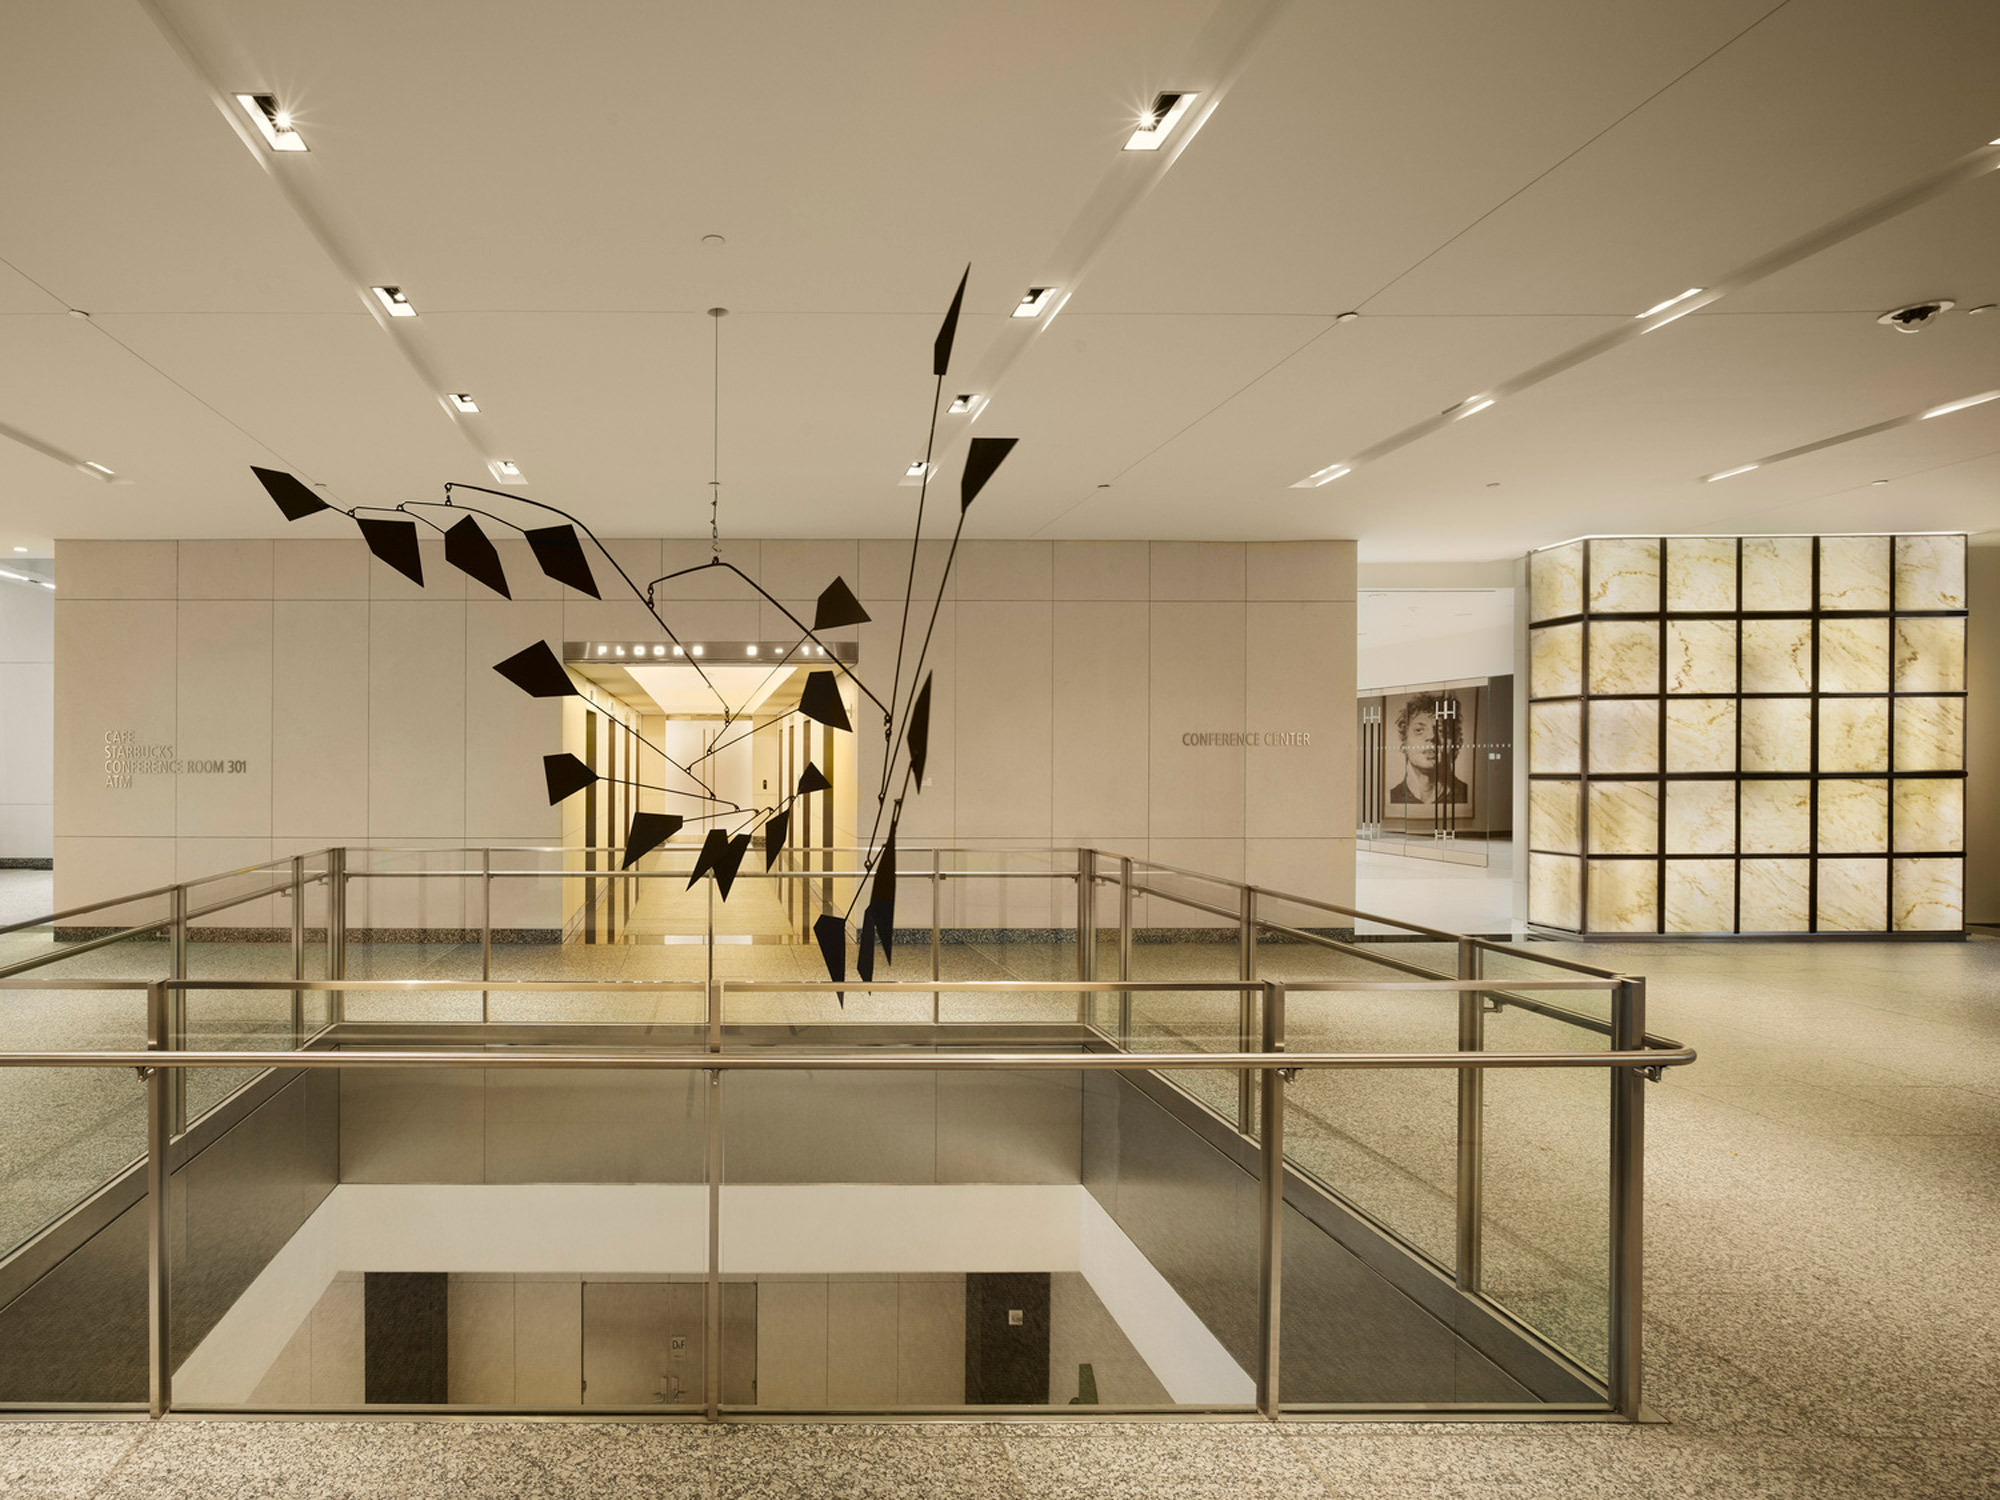 Minimalist lobby featuring a mobile sculpture with geometric shapes suspended above, complemented by warm, diffused lighting from a backlit translucent wall panel and the use of reflective materials for an elegant, modern atmosphere.